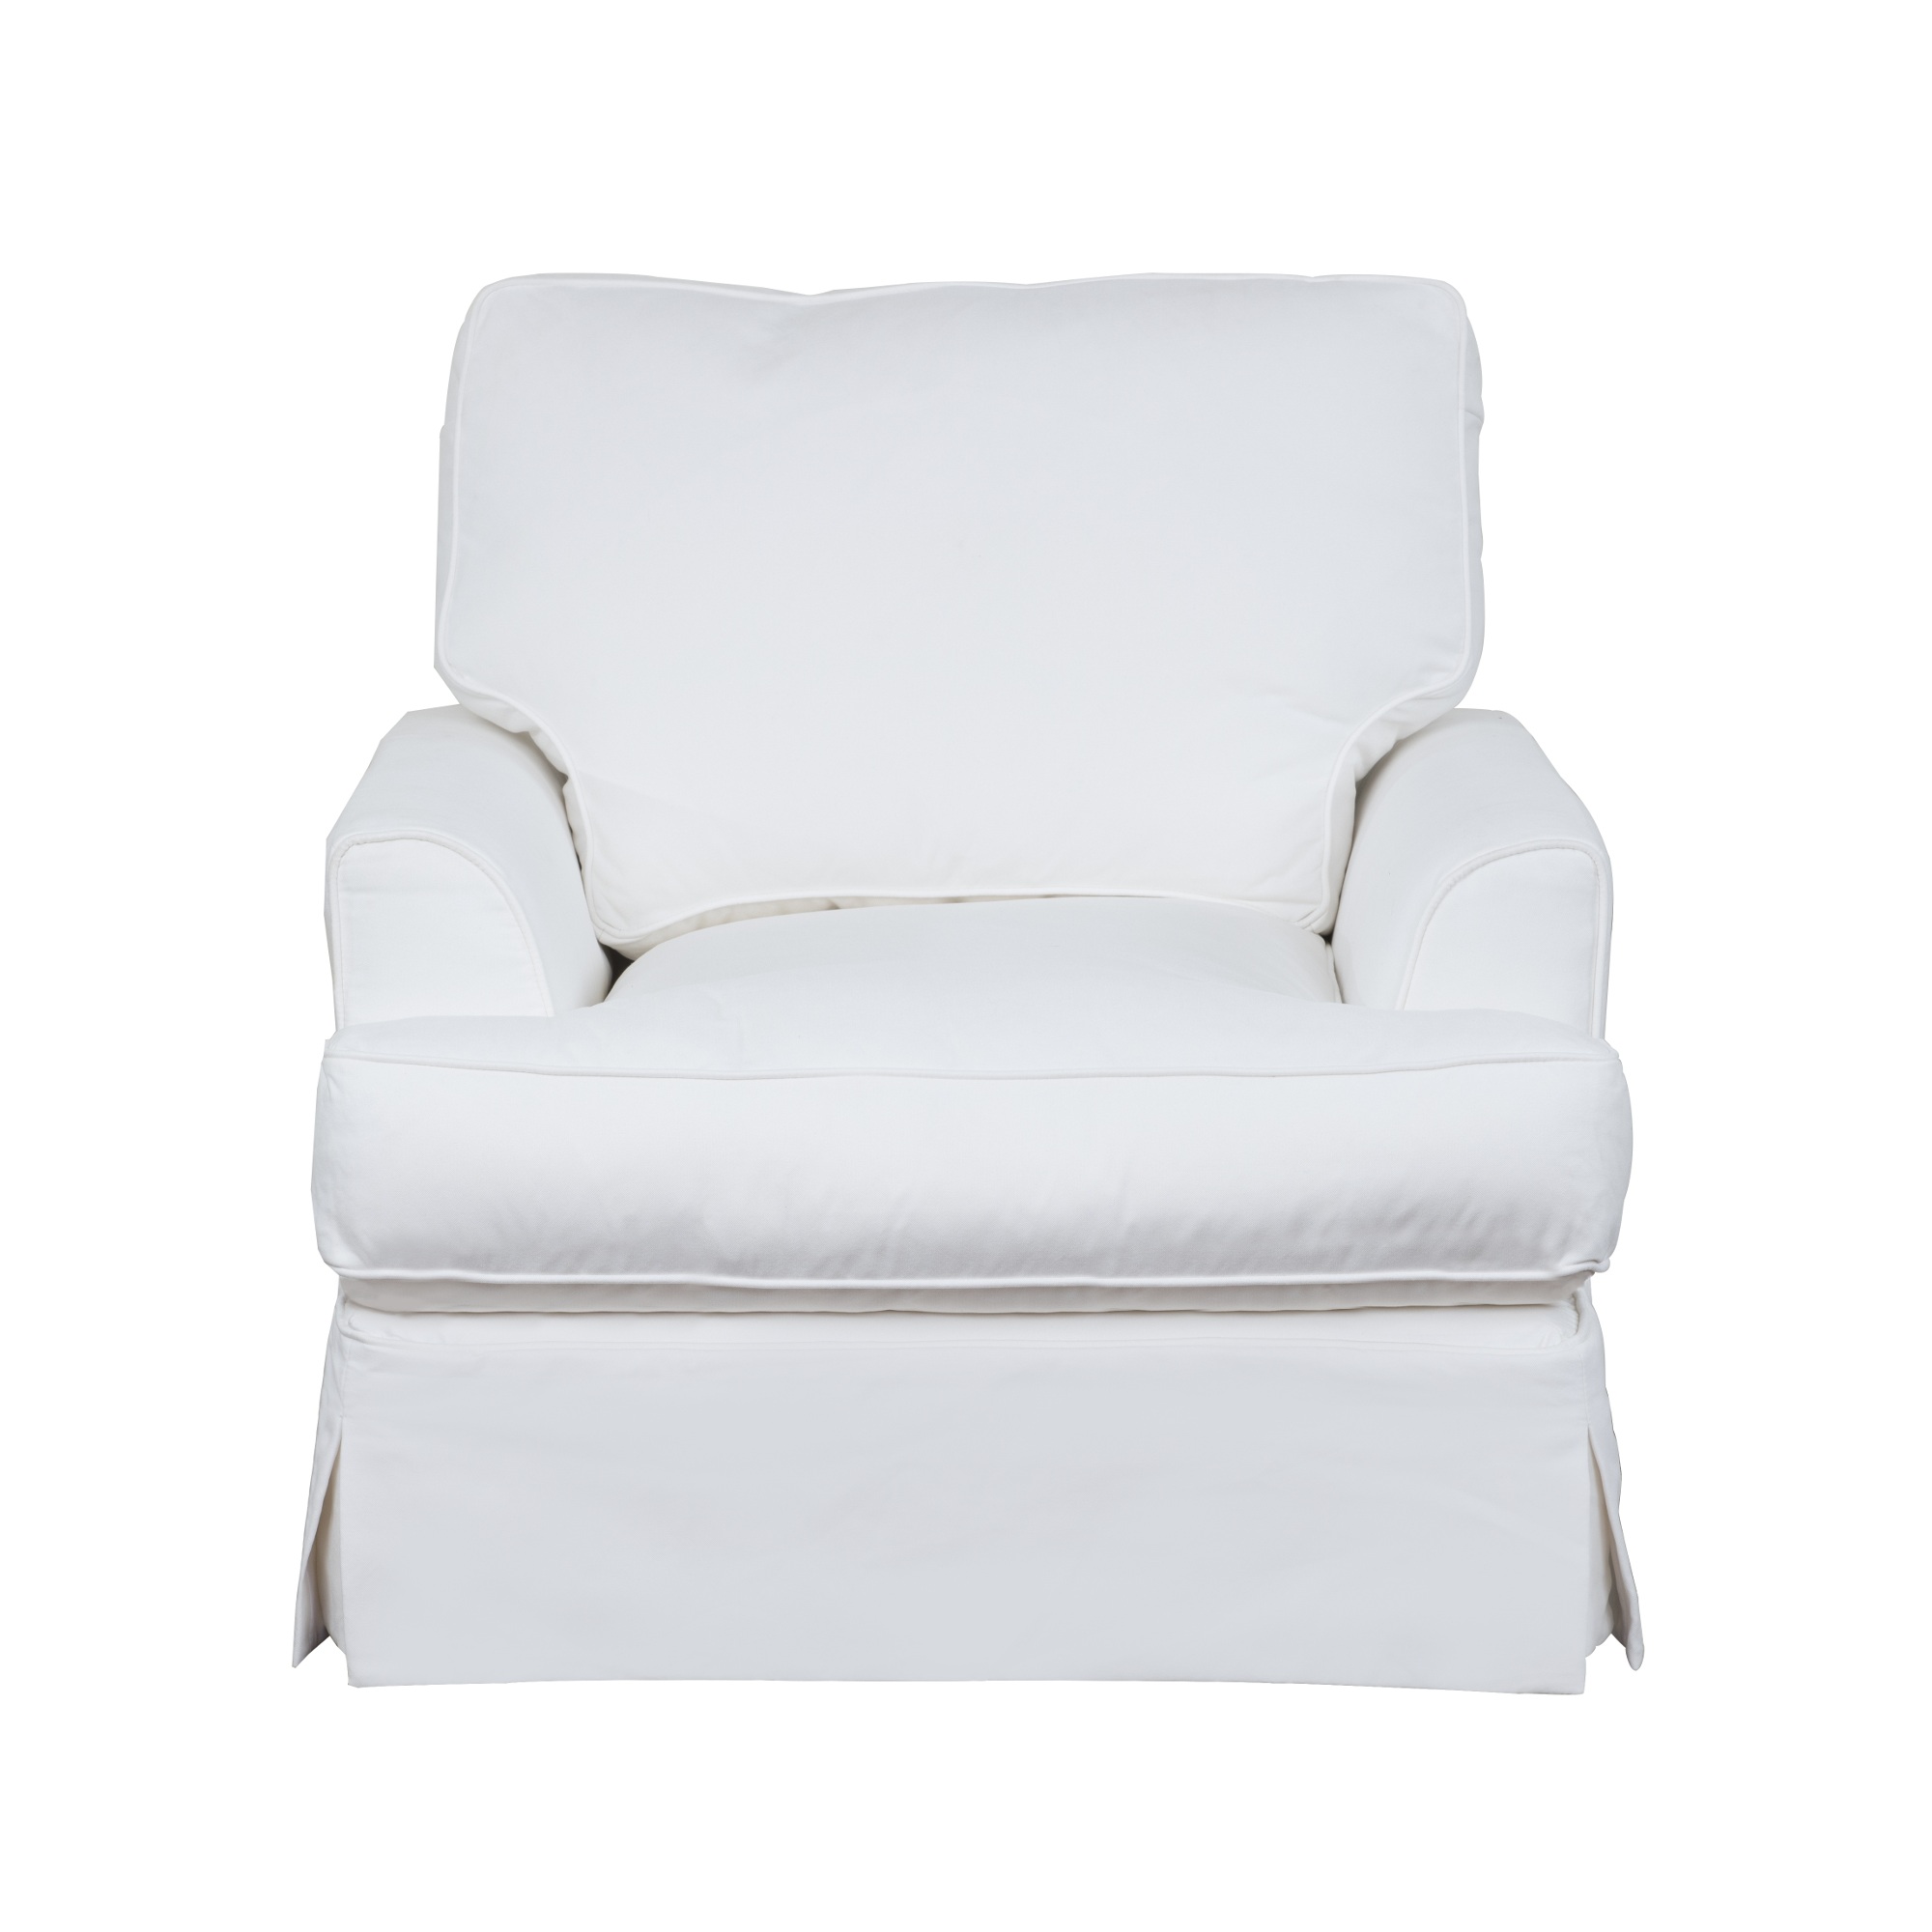 The Hamptons Collection 39" White Performance Fabric Slipcover Chair